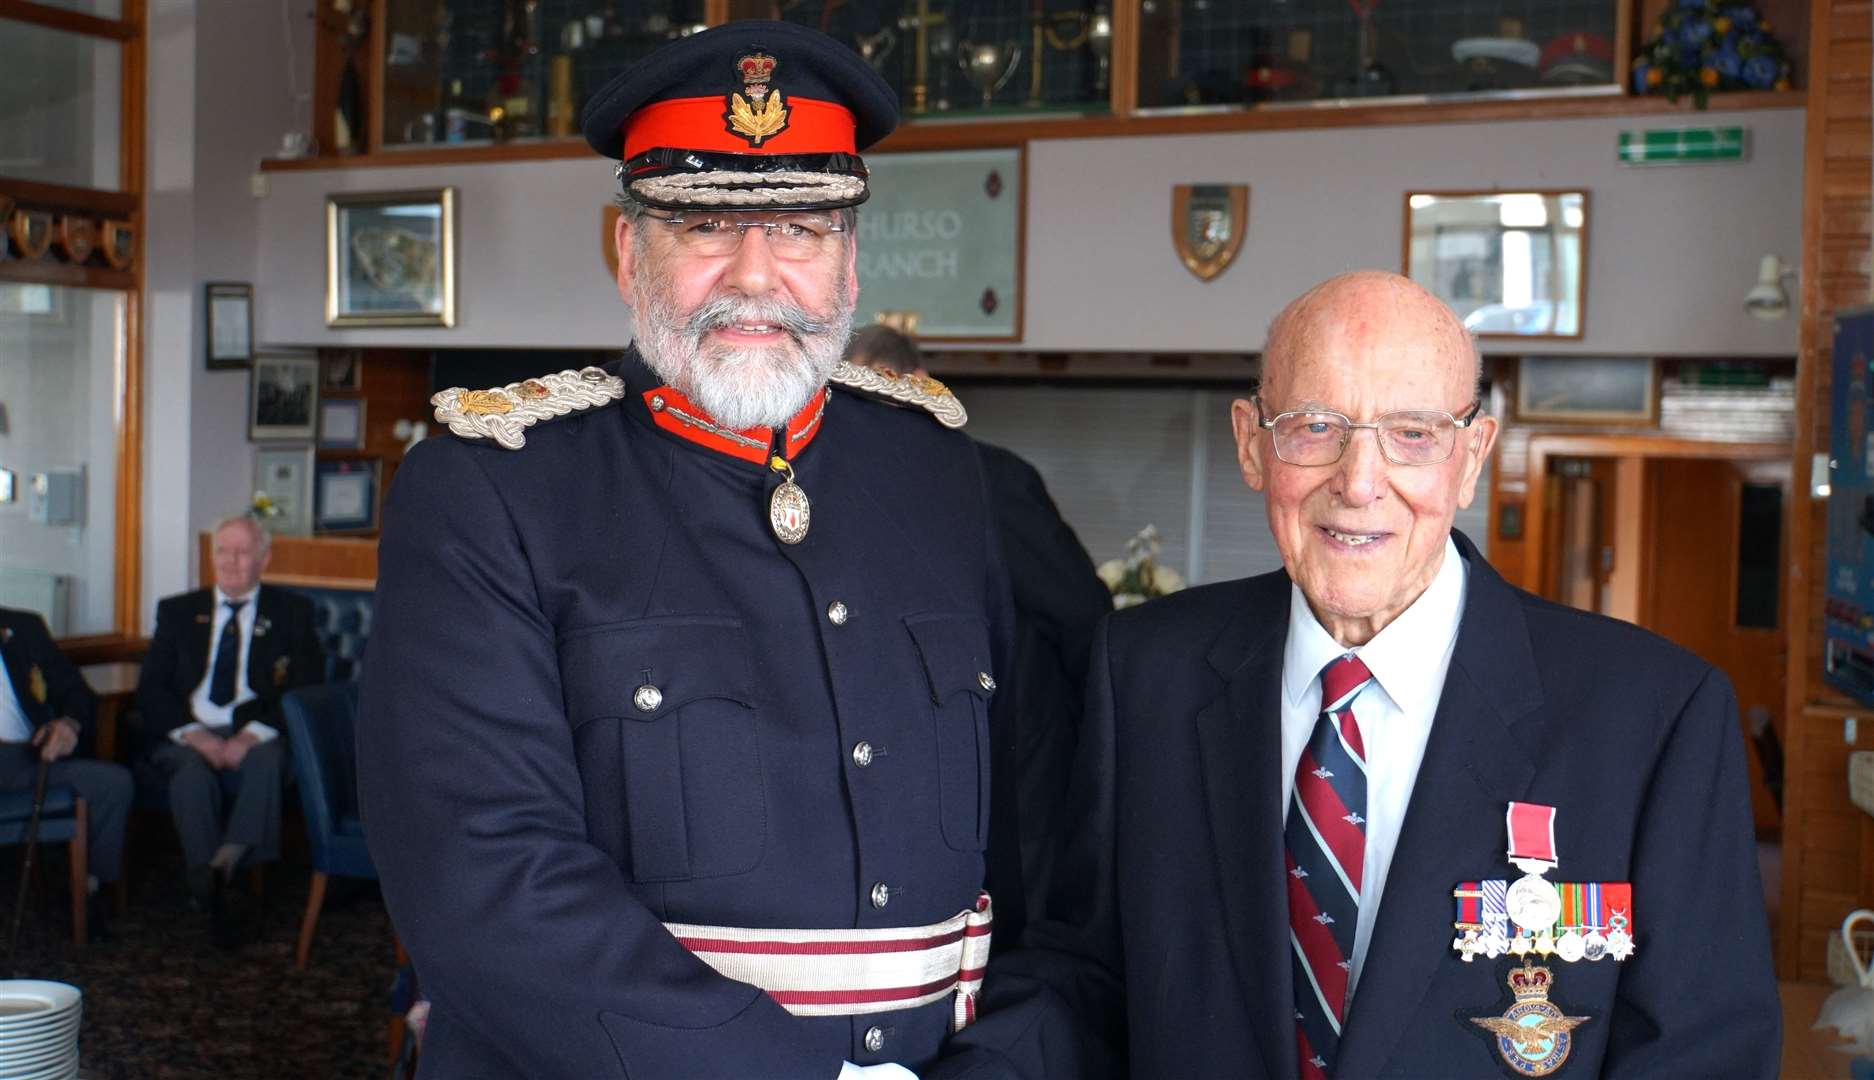 The Lord Lieutenant of Caithness, left, with Don Mason just after his BEM medal was pinned on at a special event in Thurso in May 2019.